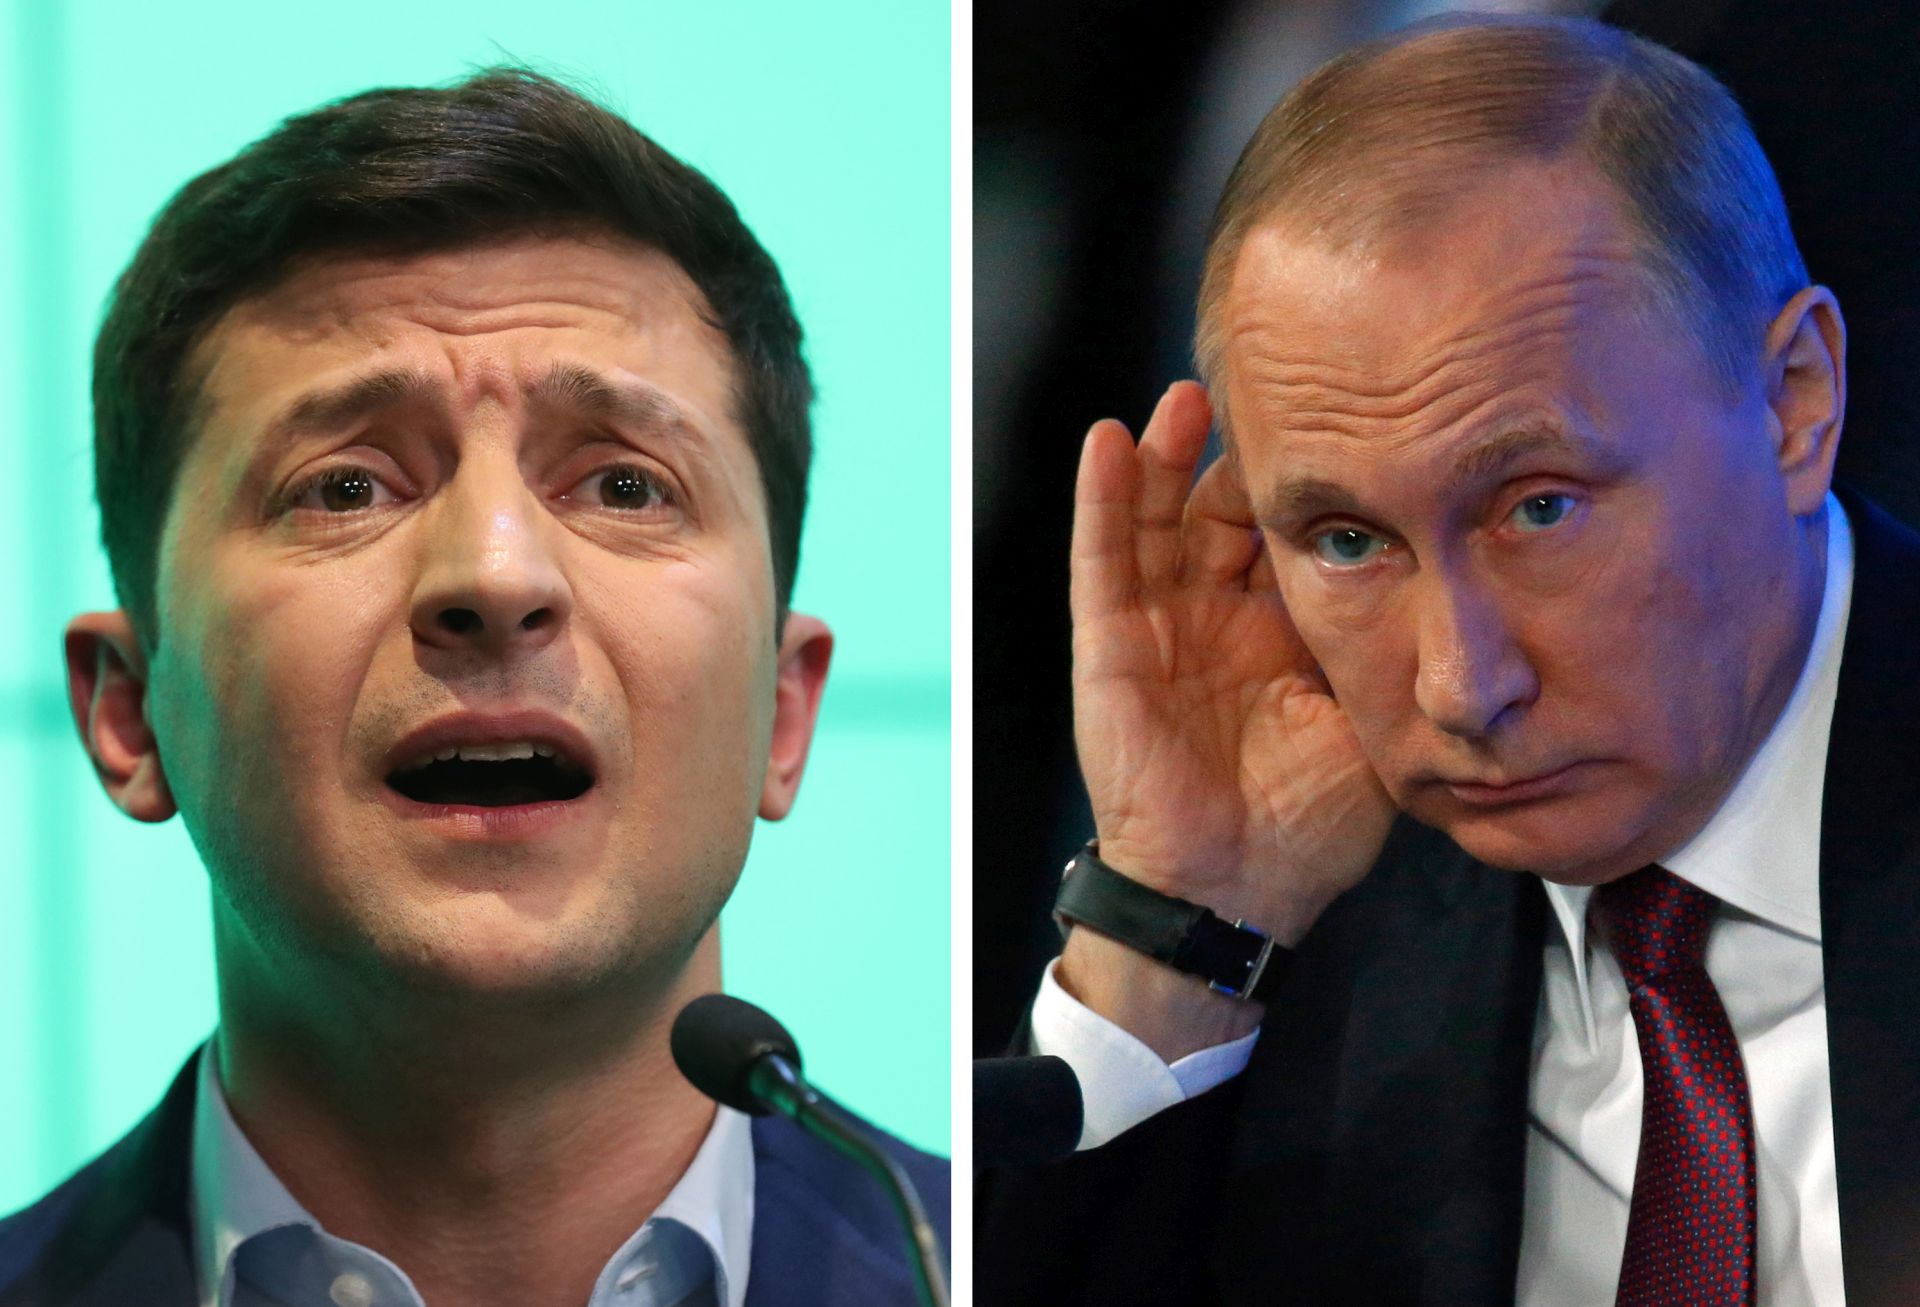 epa07713961 (FILE / COMPOSITE) - Ukranian then Presidential candidate Volodymyr Zelensky (L) talks to the media during the Ukrainian presidential elections in Kiev, Ukraine, 21 April 2019, and Russian President Vladimir Putin (R) gestures while answering a question during his annual press conference in in Moscow, Russia, 23 December 2016 (images reissued 13 July 2019). According to reports, The Ukraine's President Zelensky called Russian President Put on the phone on 11 July 2019 for the first time.  EPA/TATYANA ZENKOVICH/YURI KOCHETKOV